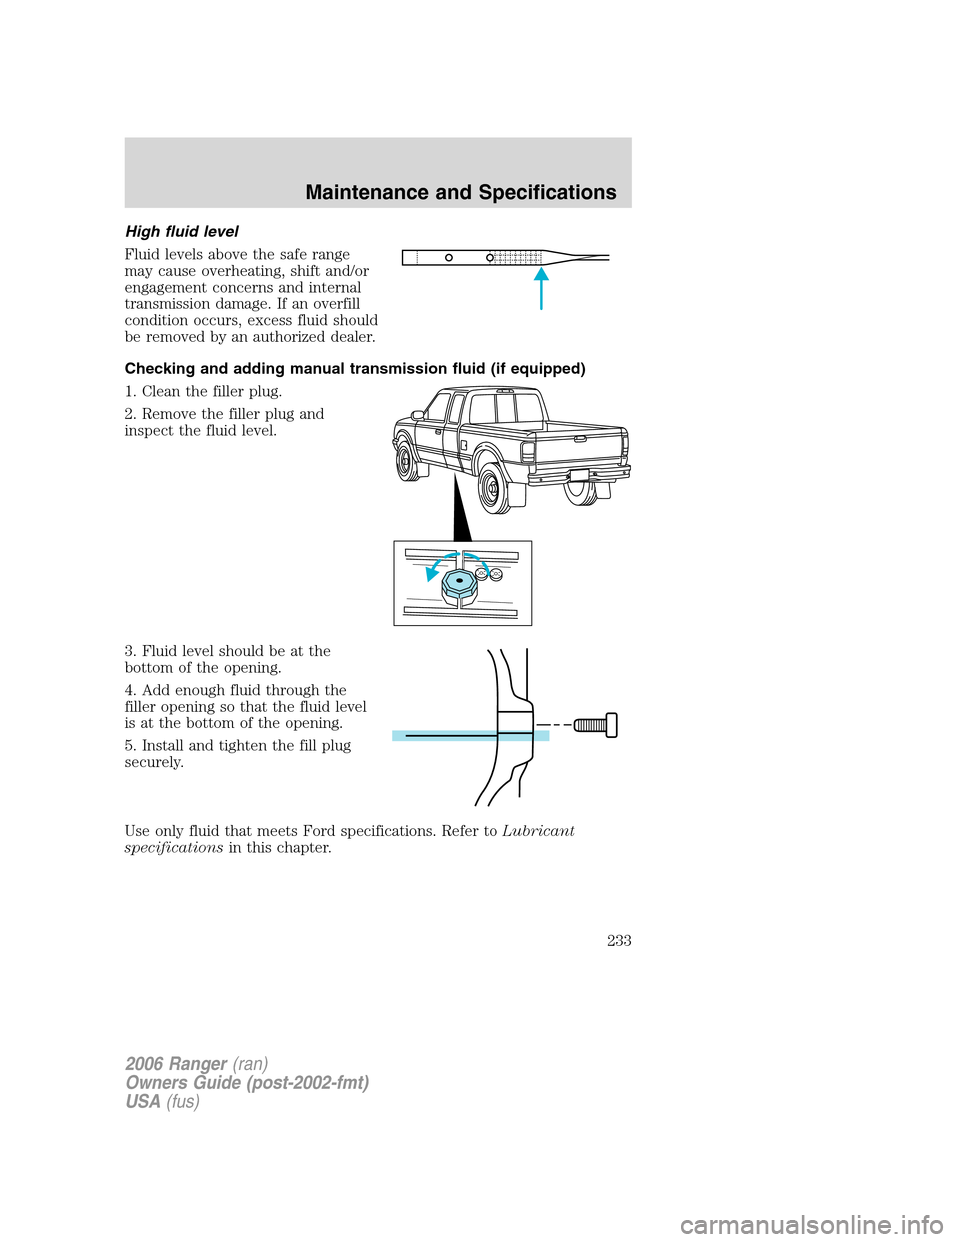 FORD RANGER 2006 2.G Owners Manual High fluid level
Fluid levels above the safe range
may cause overheating, shift and/or
engagement concerns and internal
transmission damage. If an overfill
condition occurs, excess fluid should
be rem